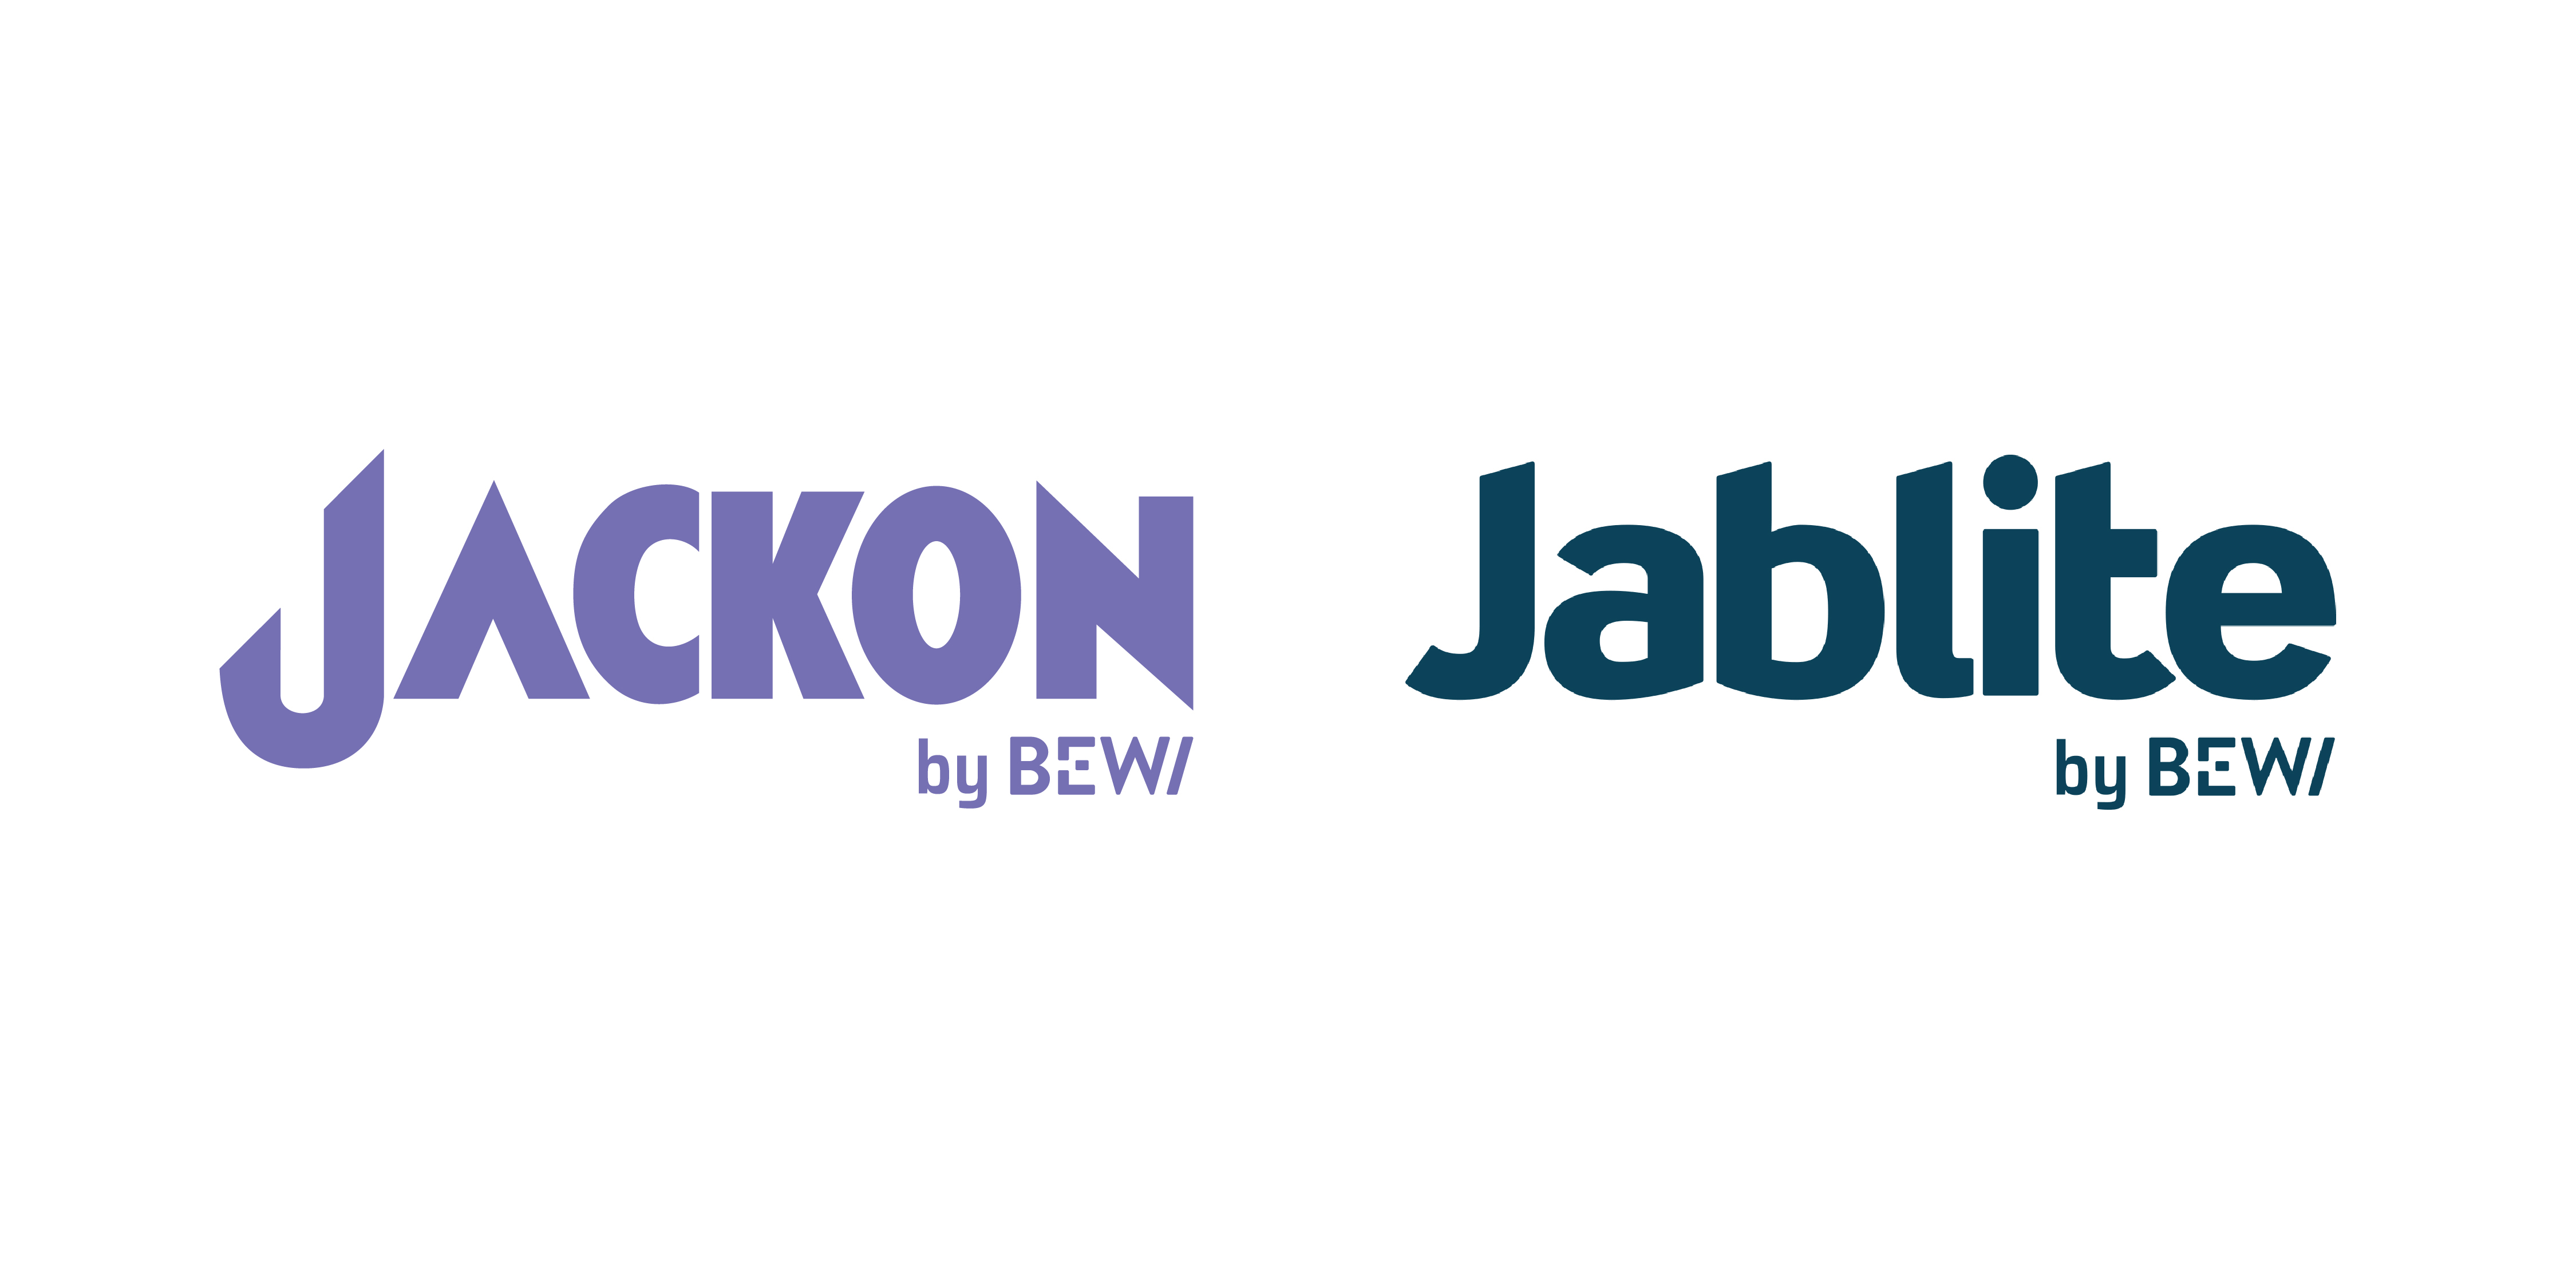 Jackon UK and Jablite Combine After Corporate Merger of Jackon and BEWI